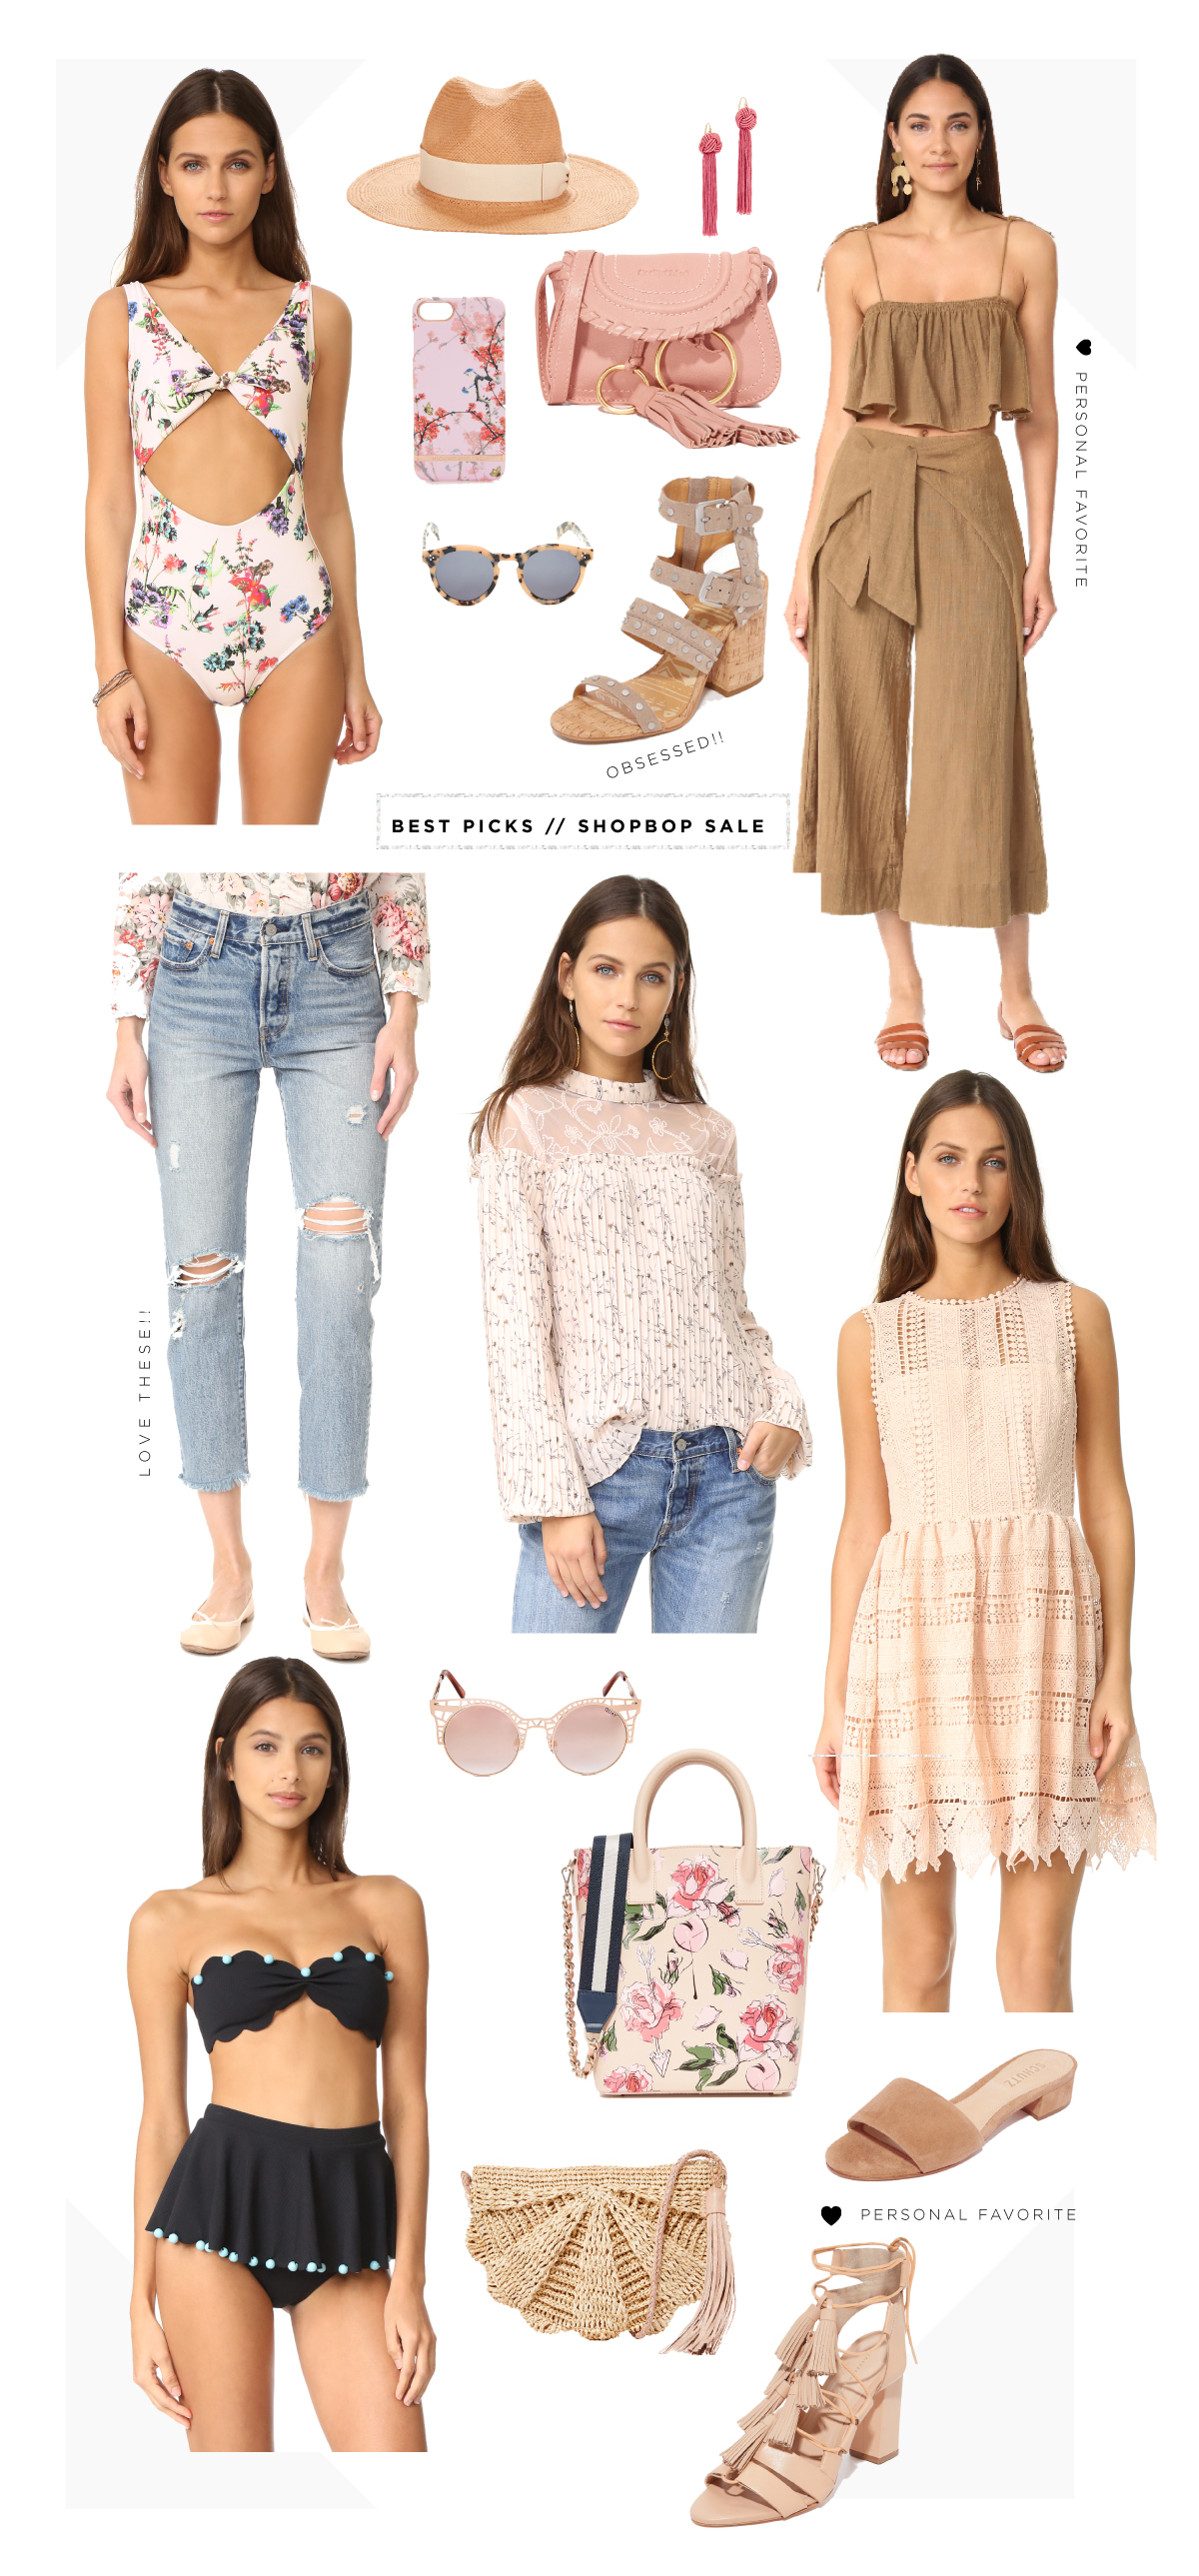 Best Items to Shop from Shopbop Sale